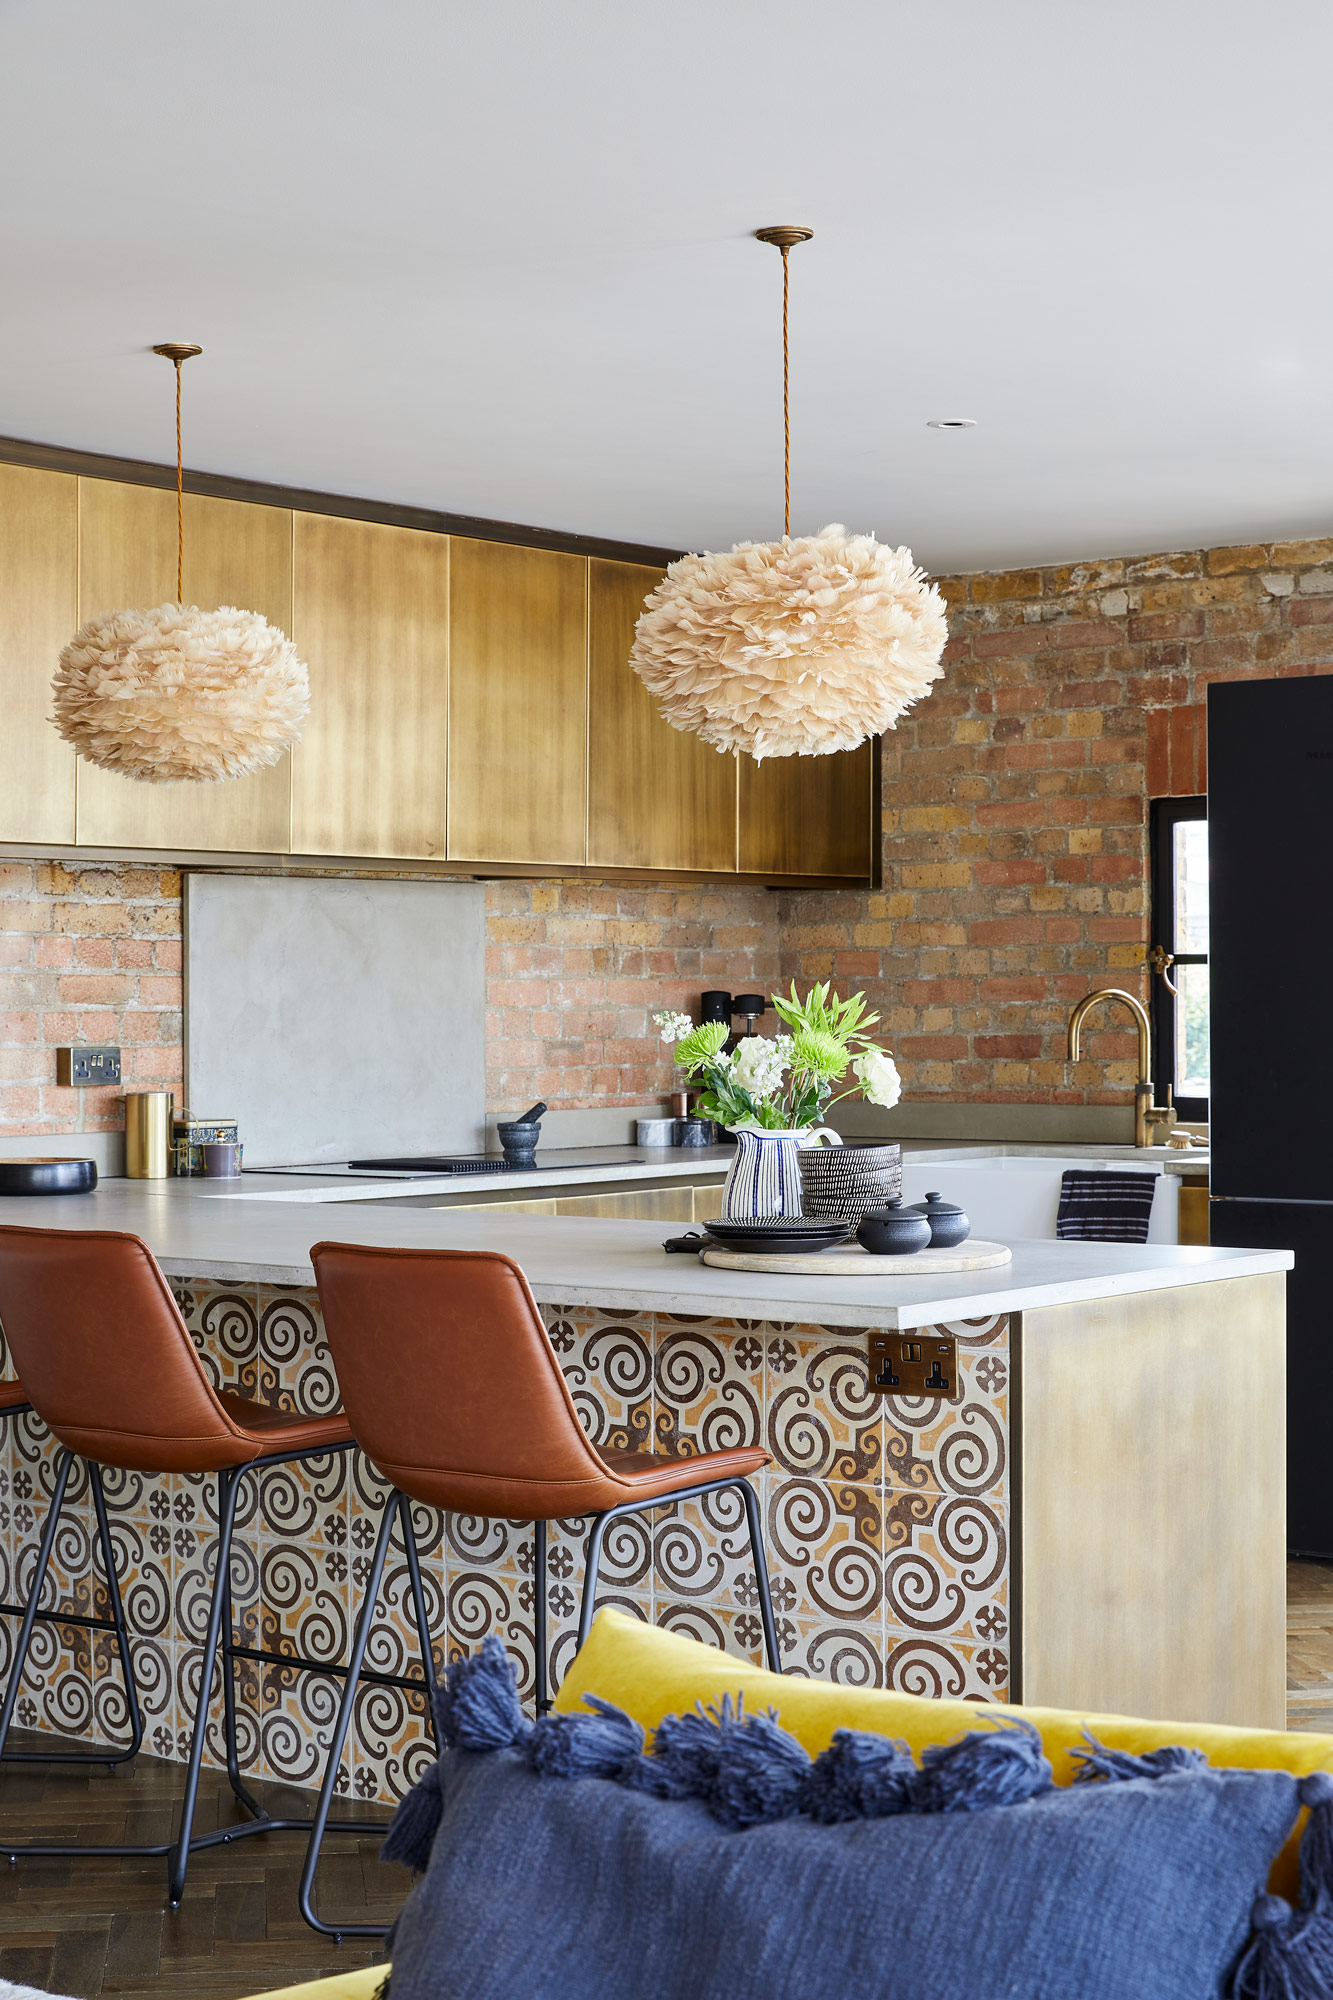 Reclaimed tiled metal kitchen with brown leather barstools